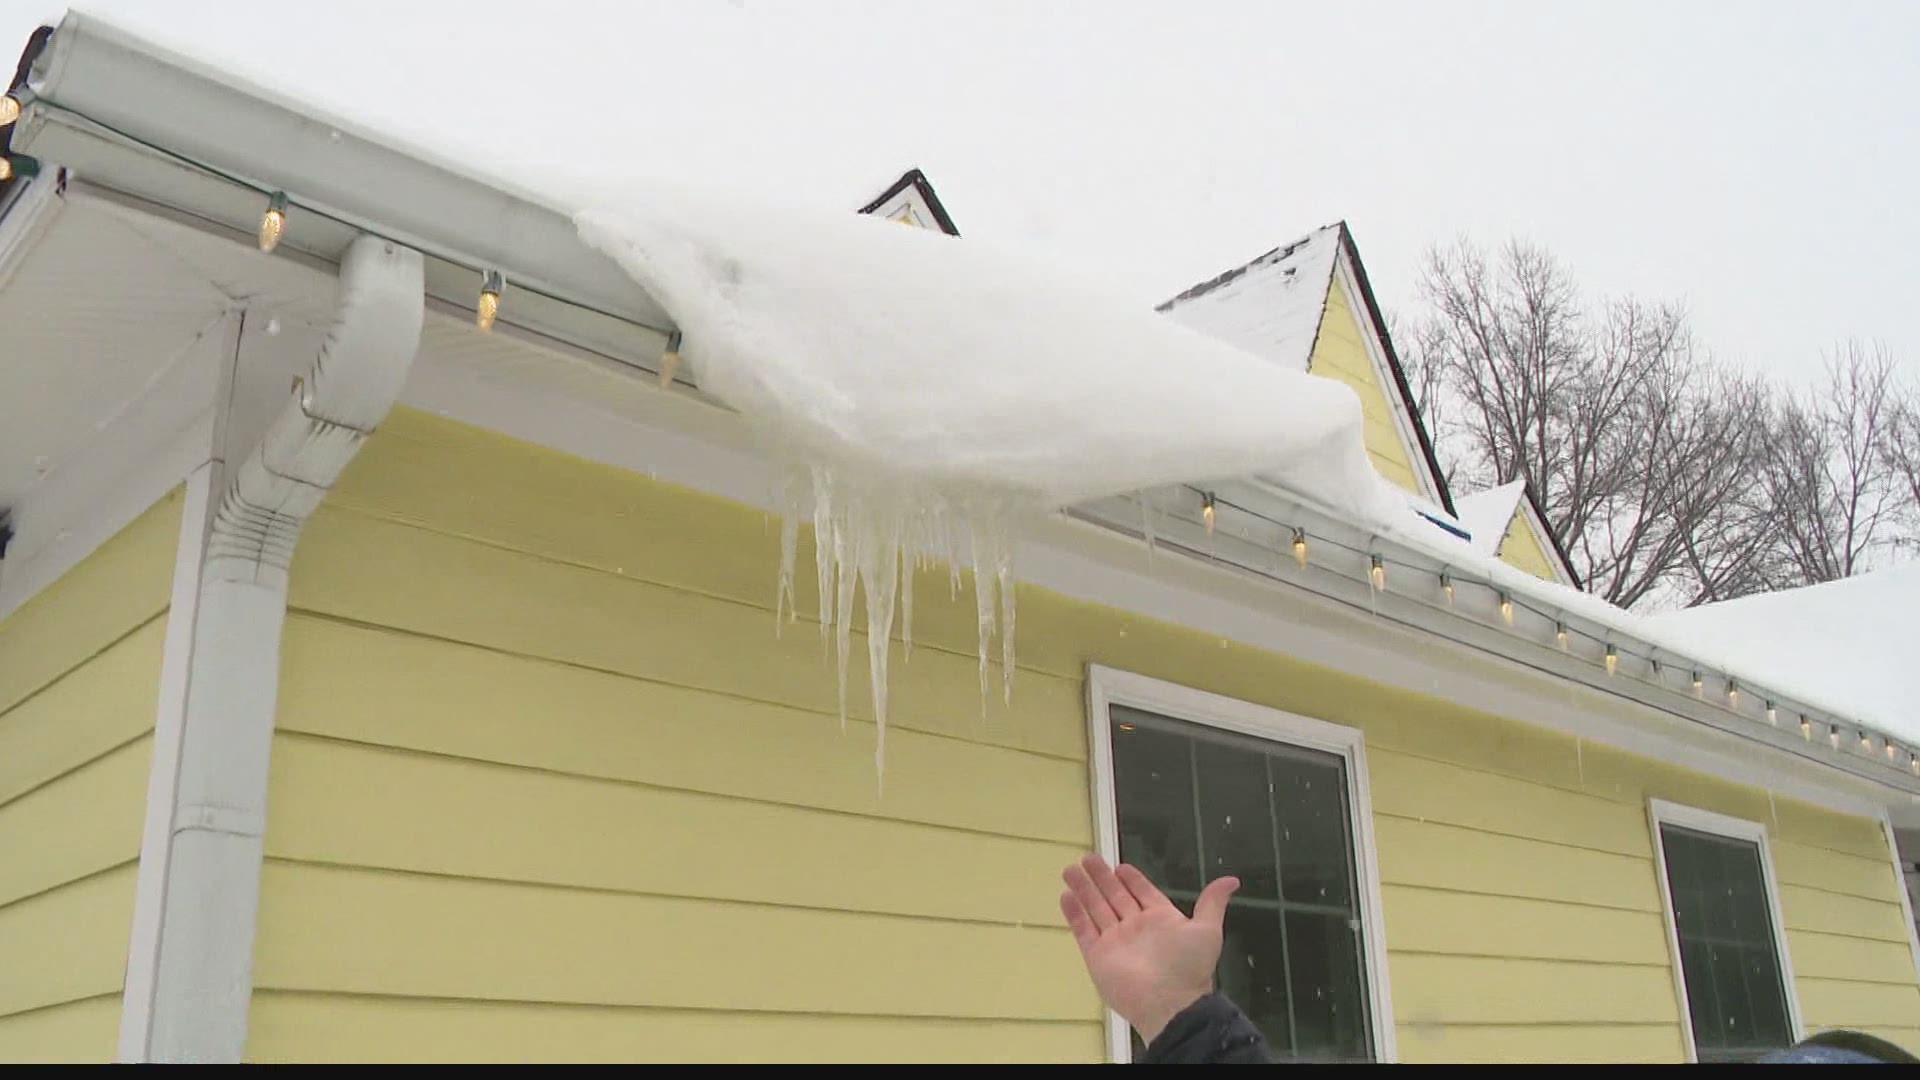 Ice forming on your gutters can damage the gutters, shingles and interior walls and ceilings.